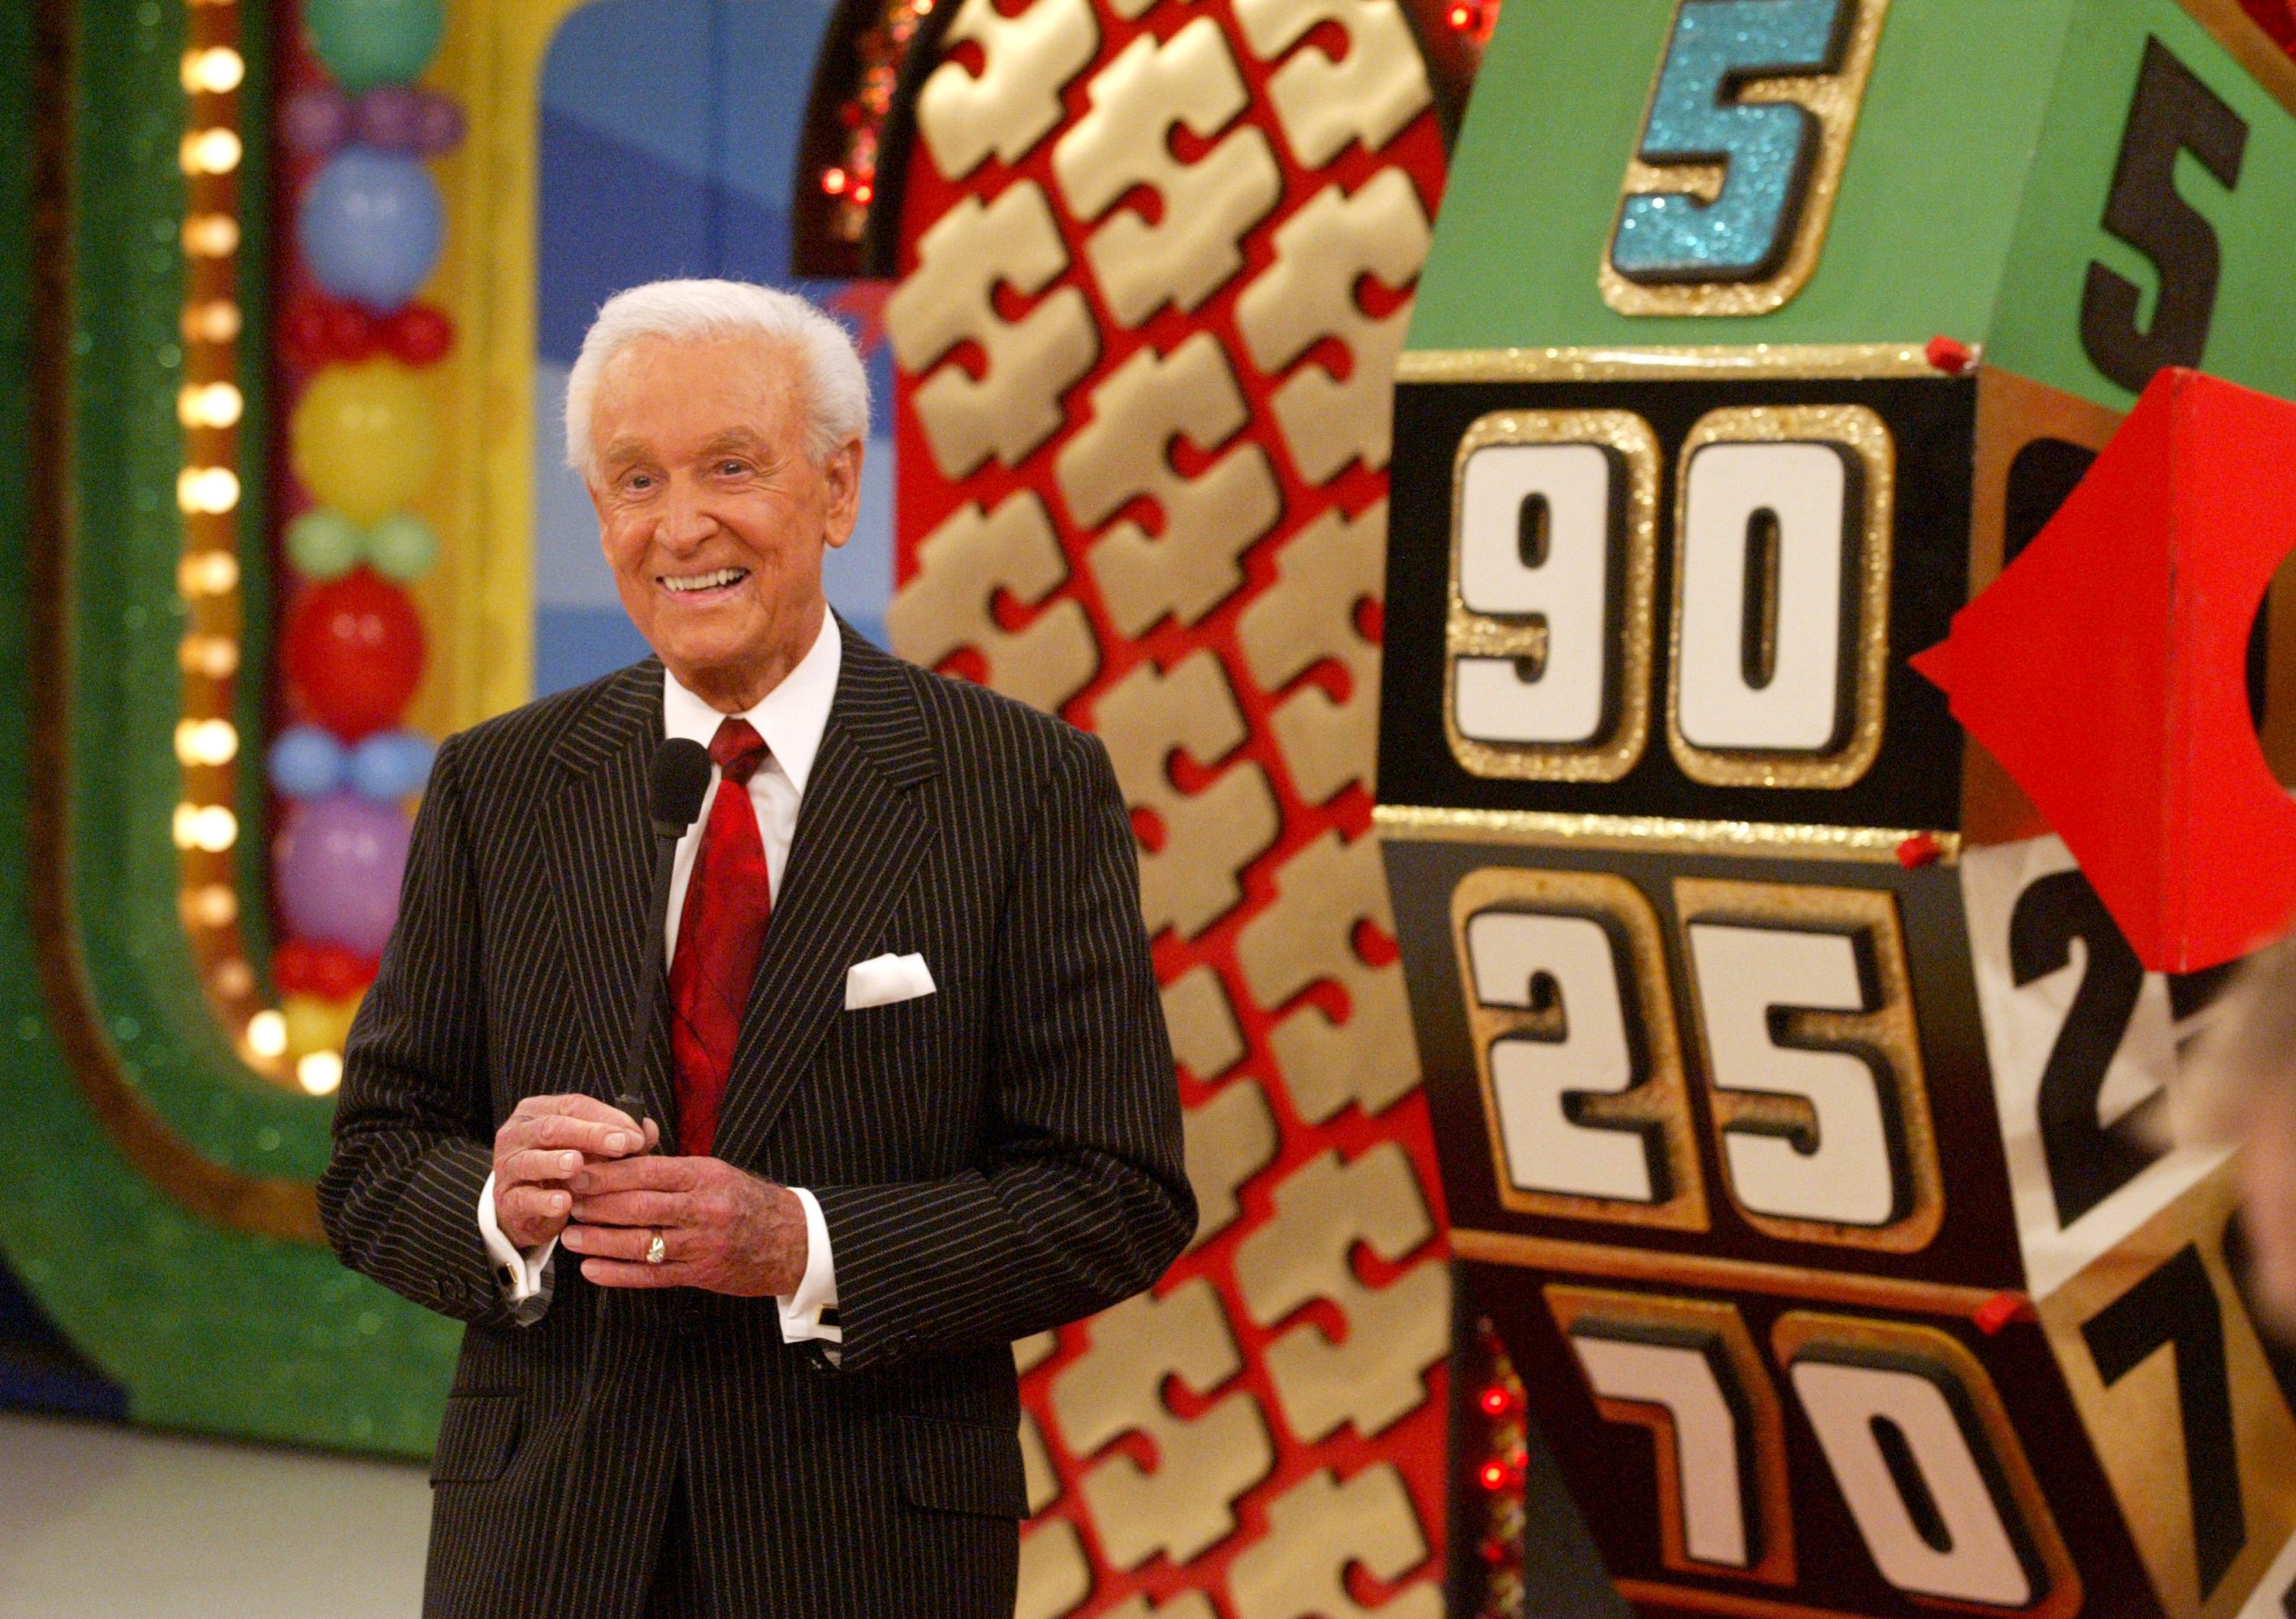 Bob Barker during "The Price is Right" 34th Season Premiere - Taping at CBS Television City in Los Angeles, California, United States. | Source: Getty Images